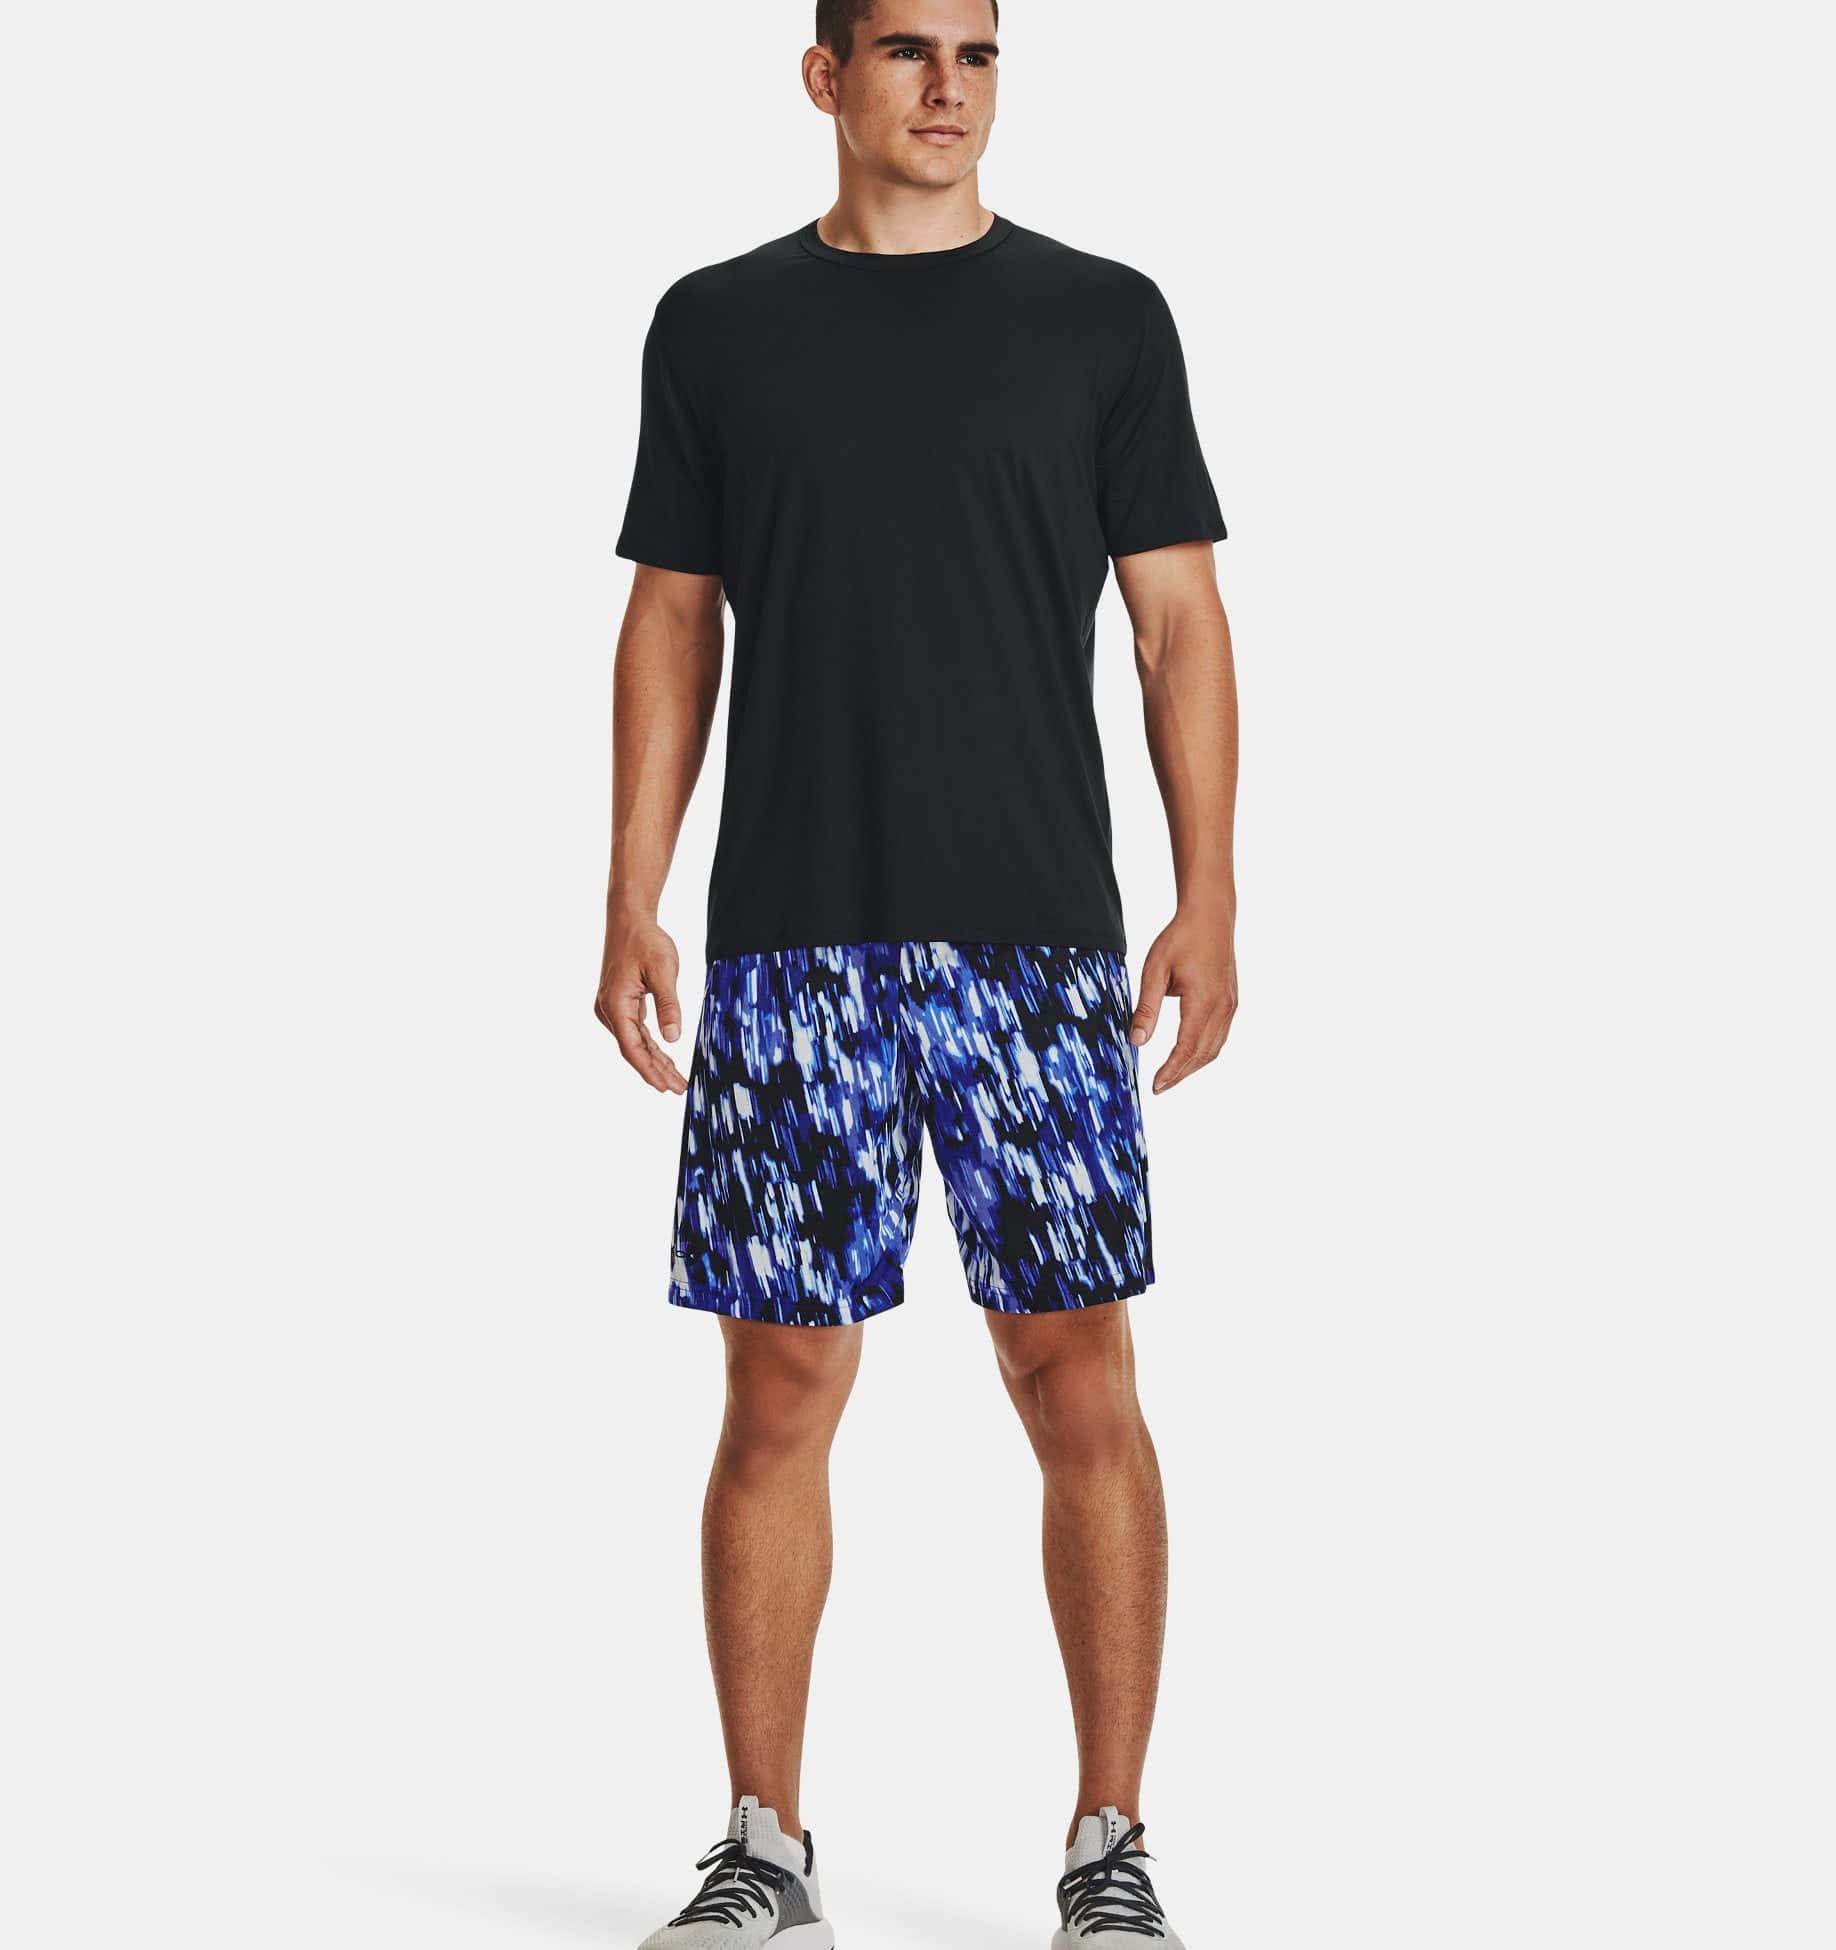 Under Armour UA Tech Printed Shorts 1370402 - Clothing & Accessories